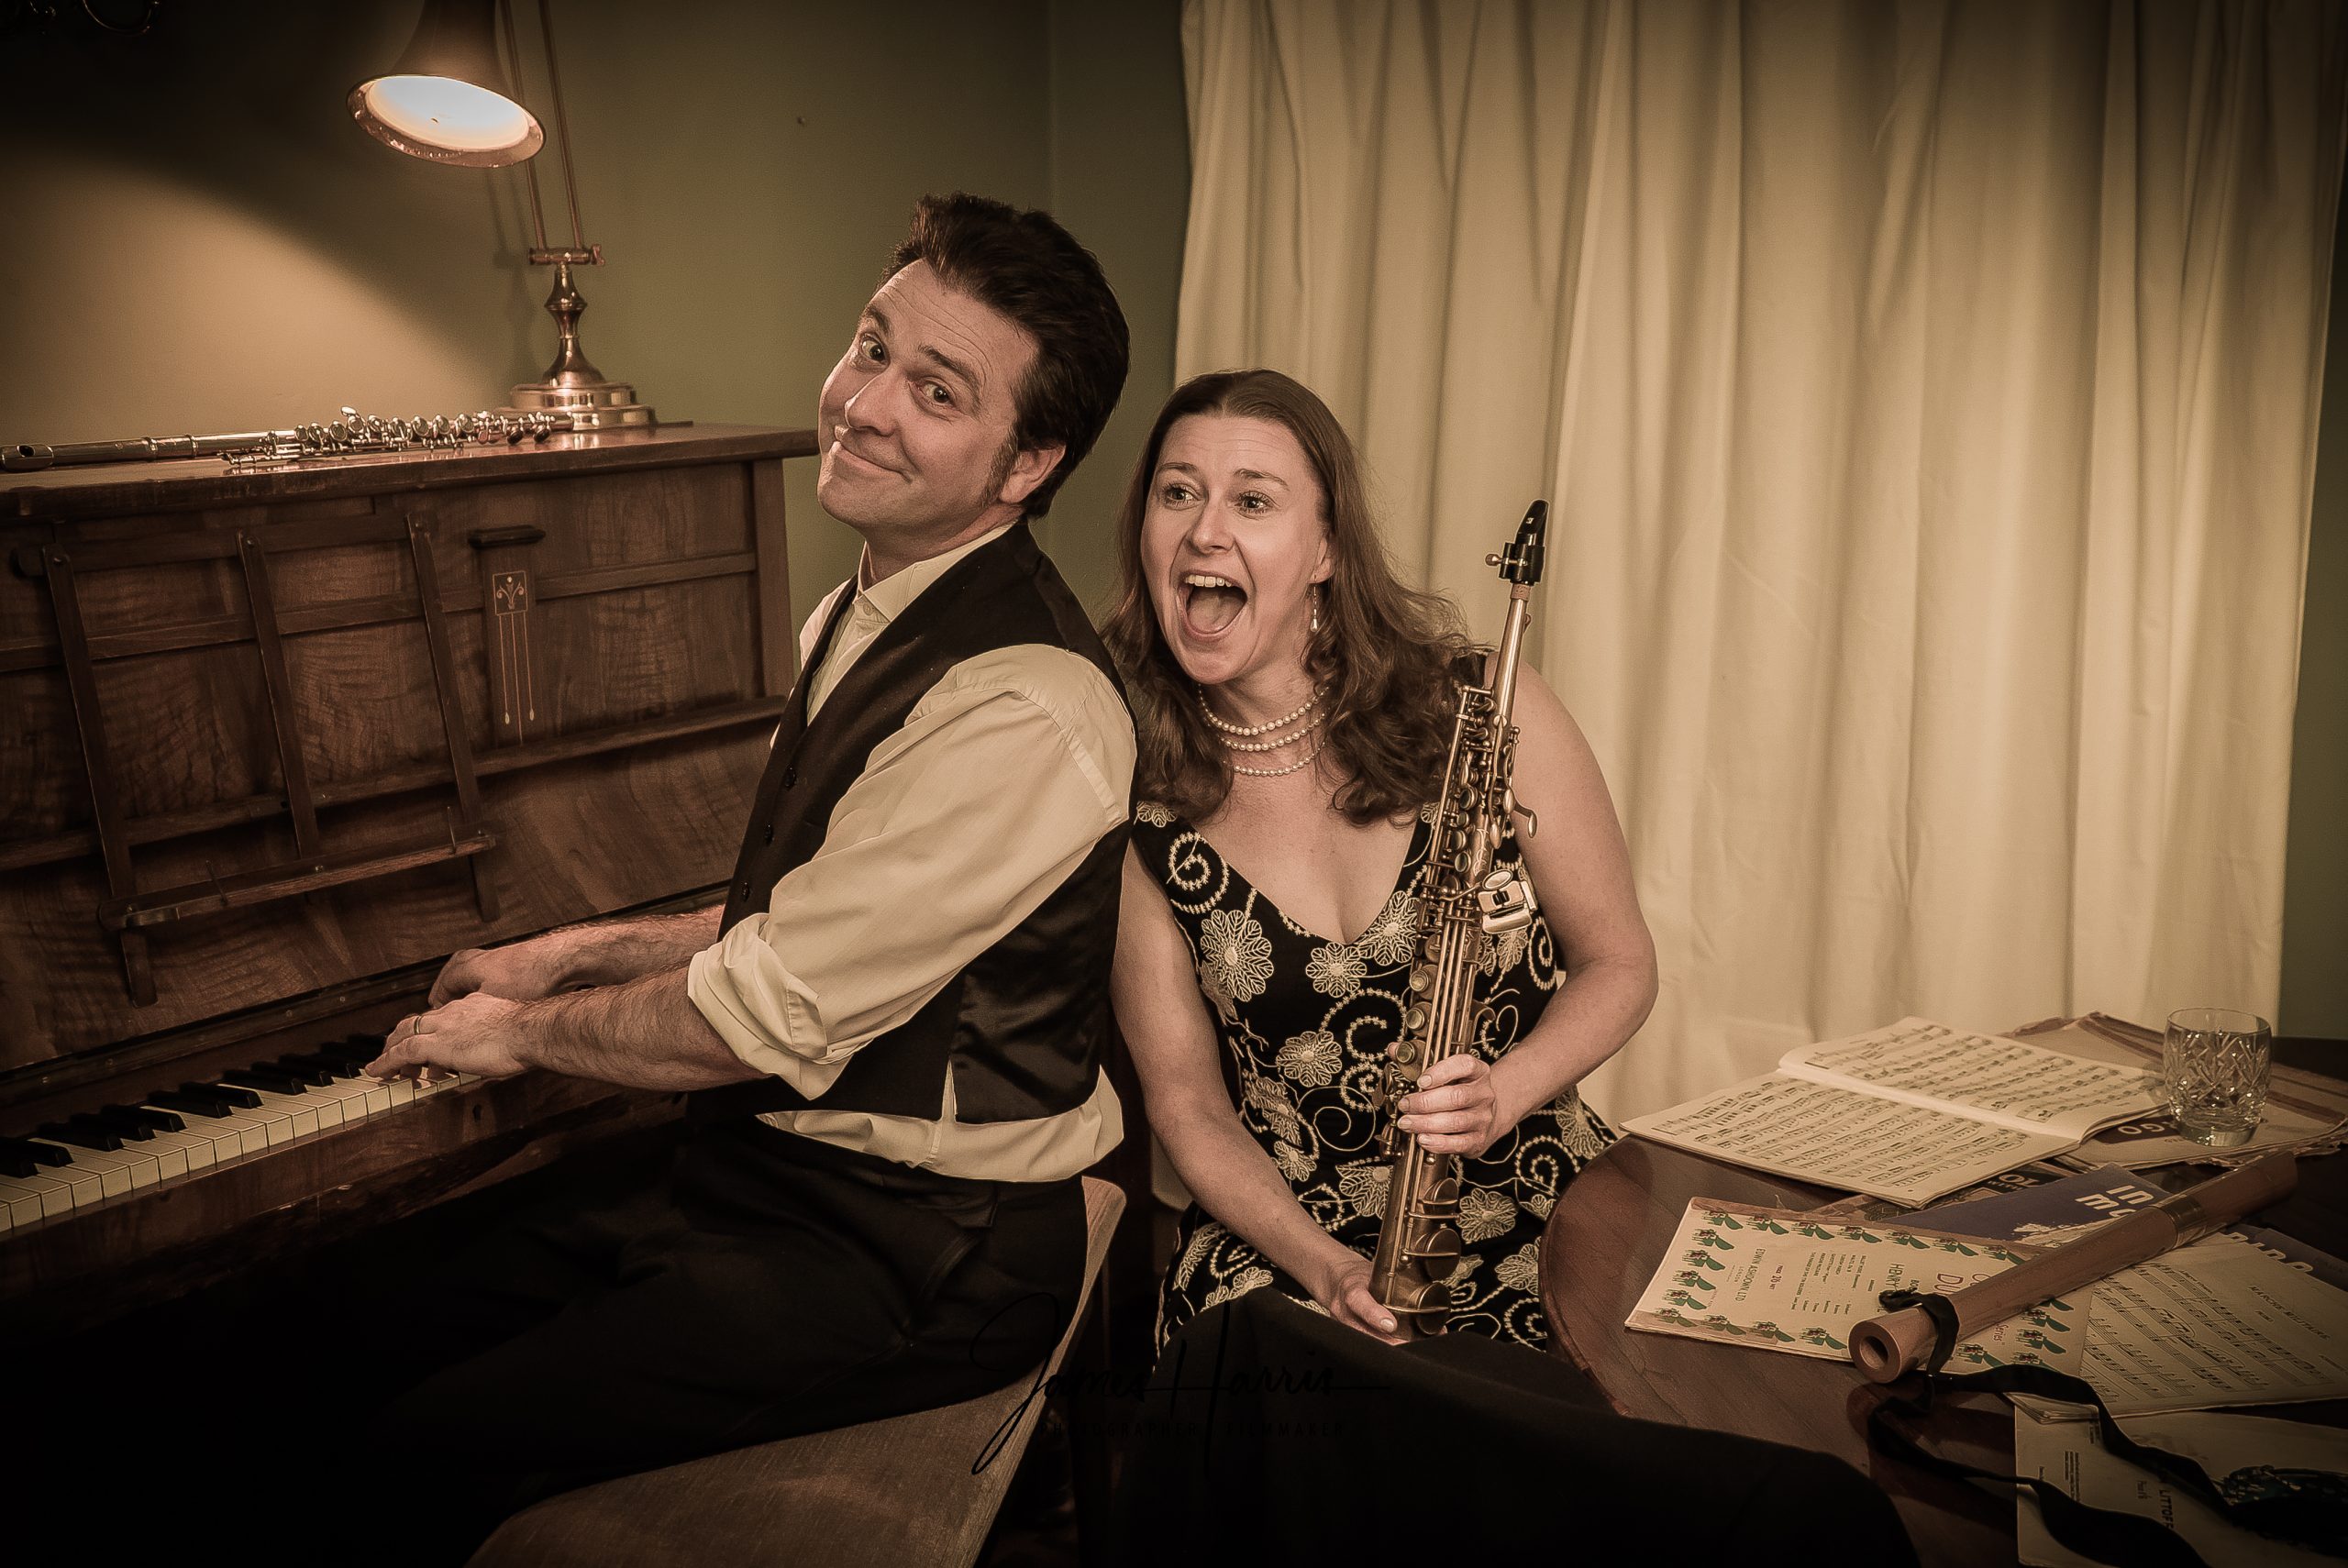 Musician Chris Green sat at a piano alongside Sophie Matthews who is holding a woodwind instrument. They are about to perform a song in a room with subtle lighting